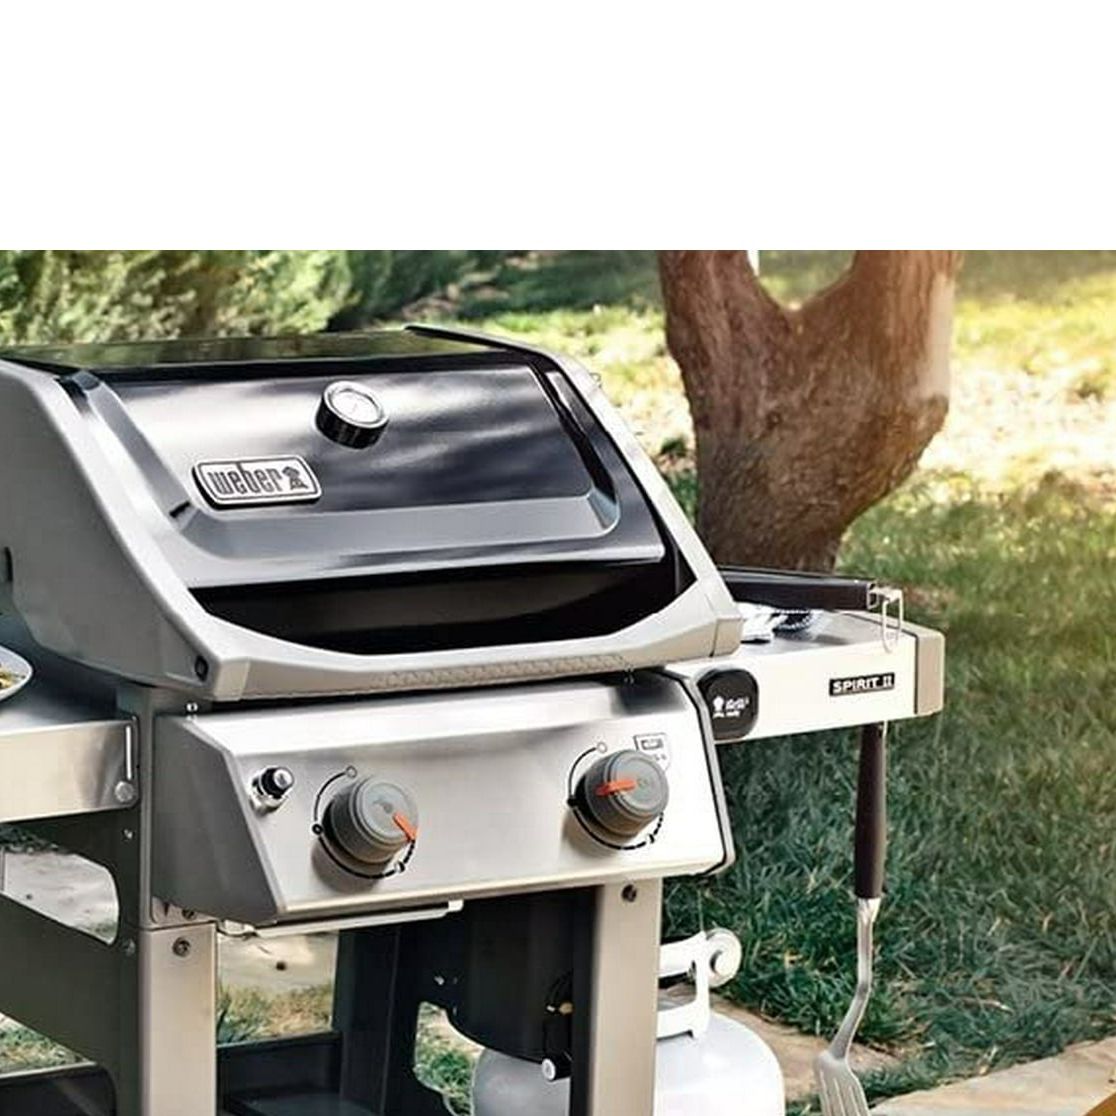 Get Up to 38% Off Editor-Approved Grills for the 4th of July